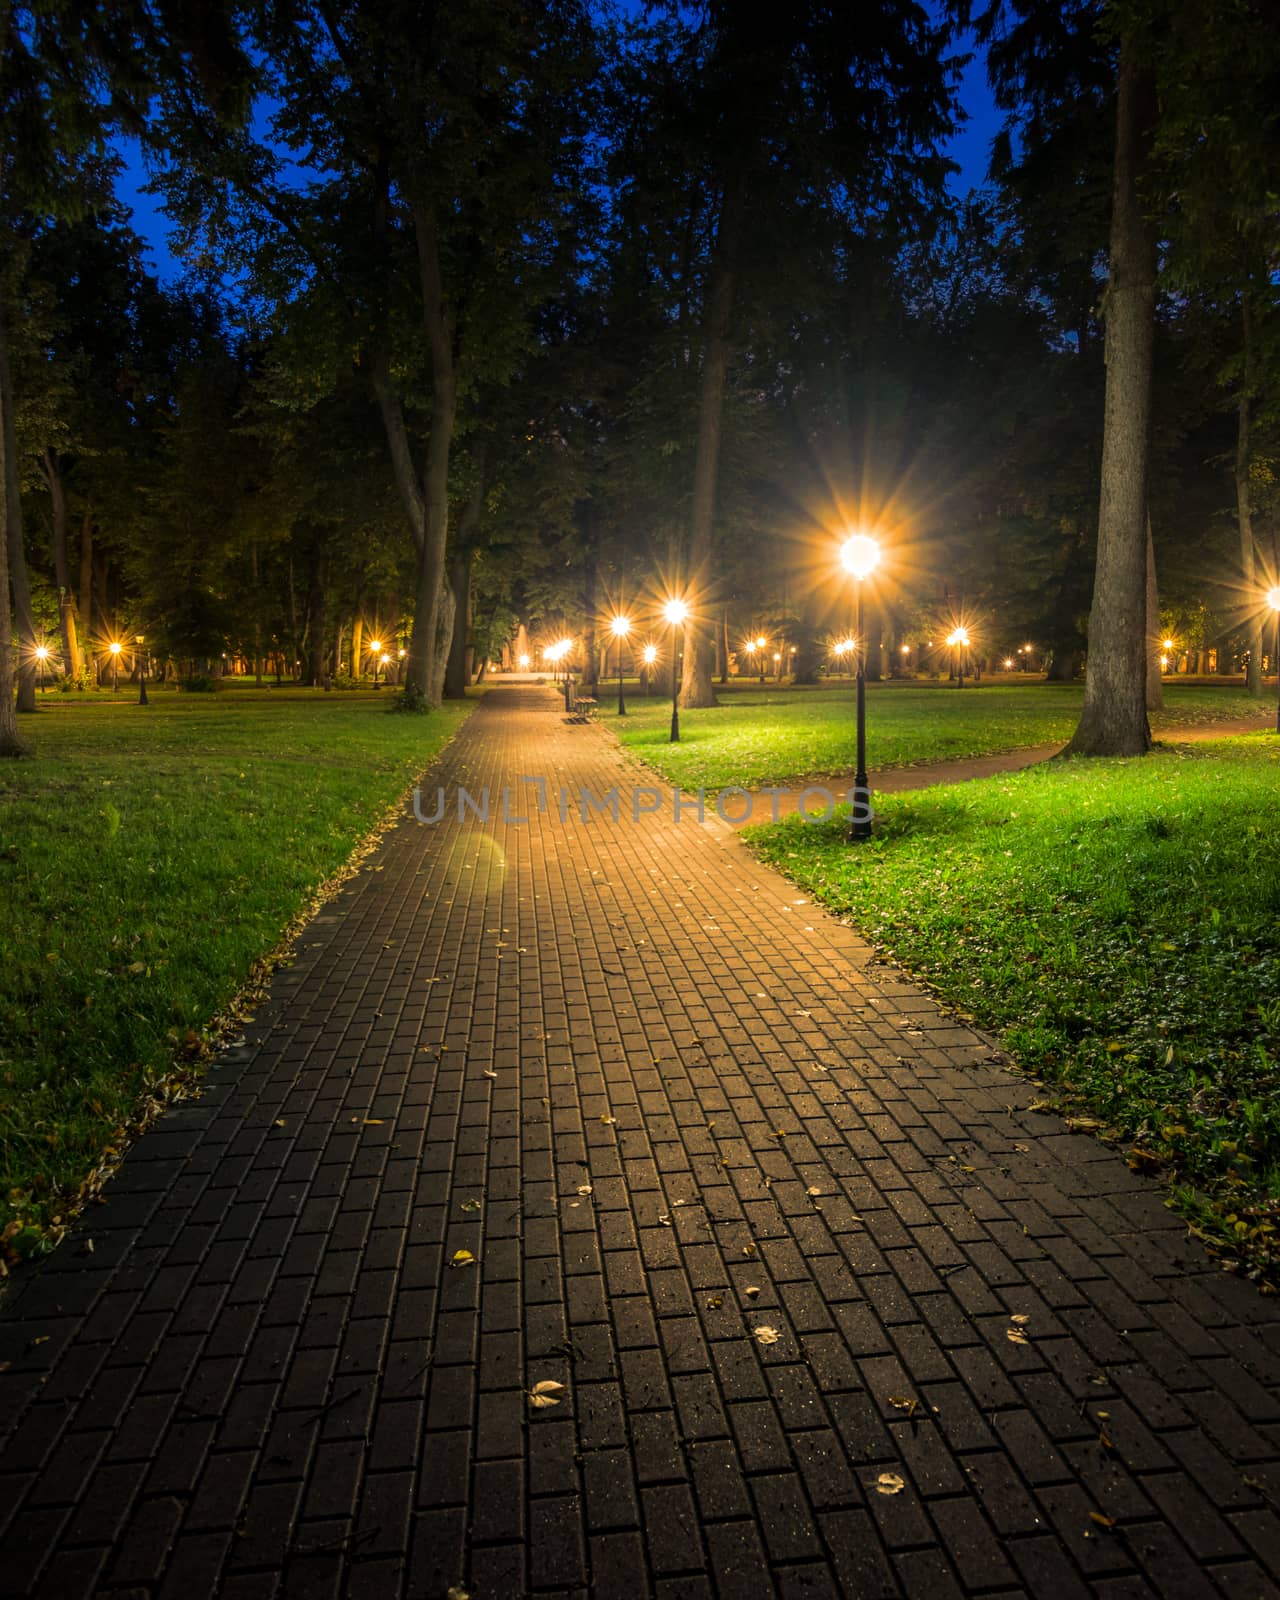 A night park lit by lanterns with a stone pavement, trees, fallen leaves and benches in early autumn. Cityscape.